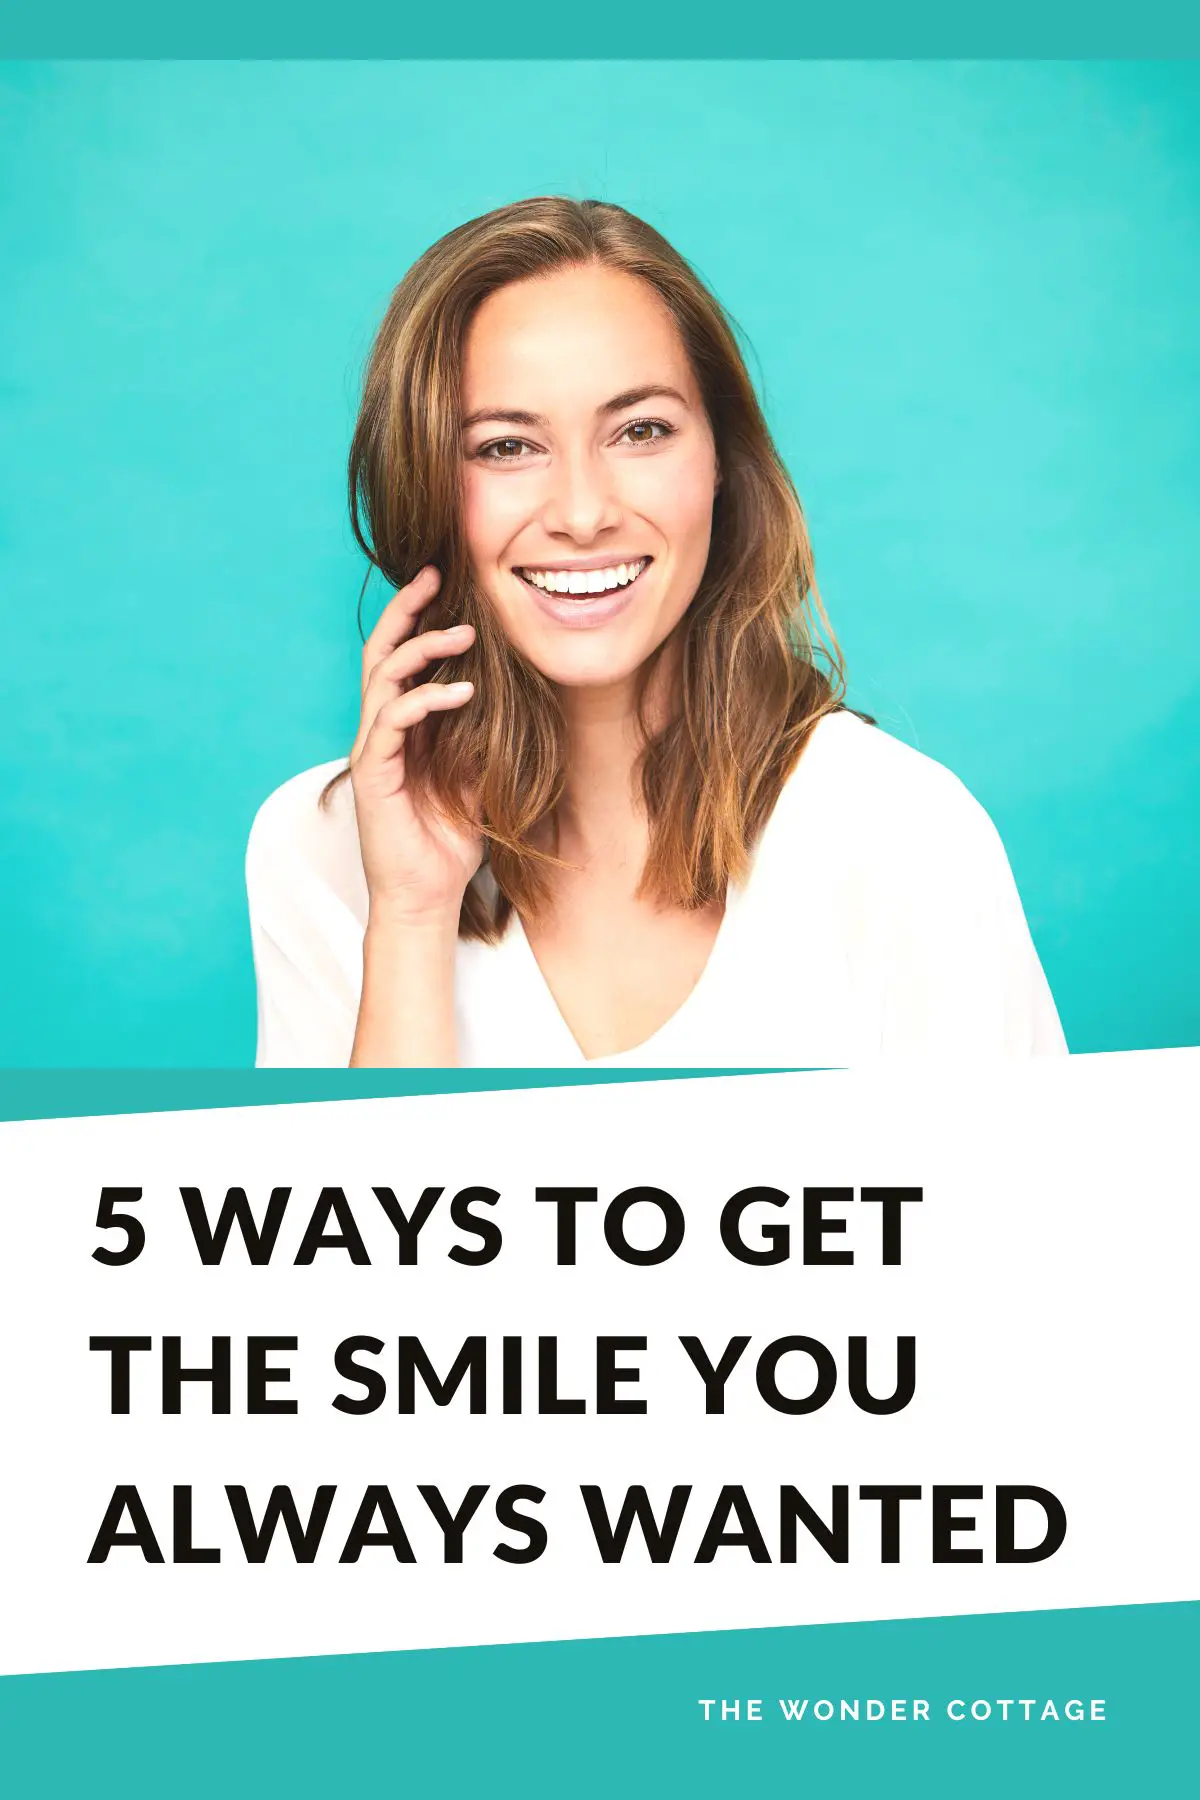 5 Ways To Get The Smile You Always Wanted